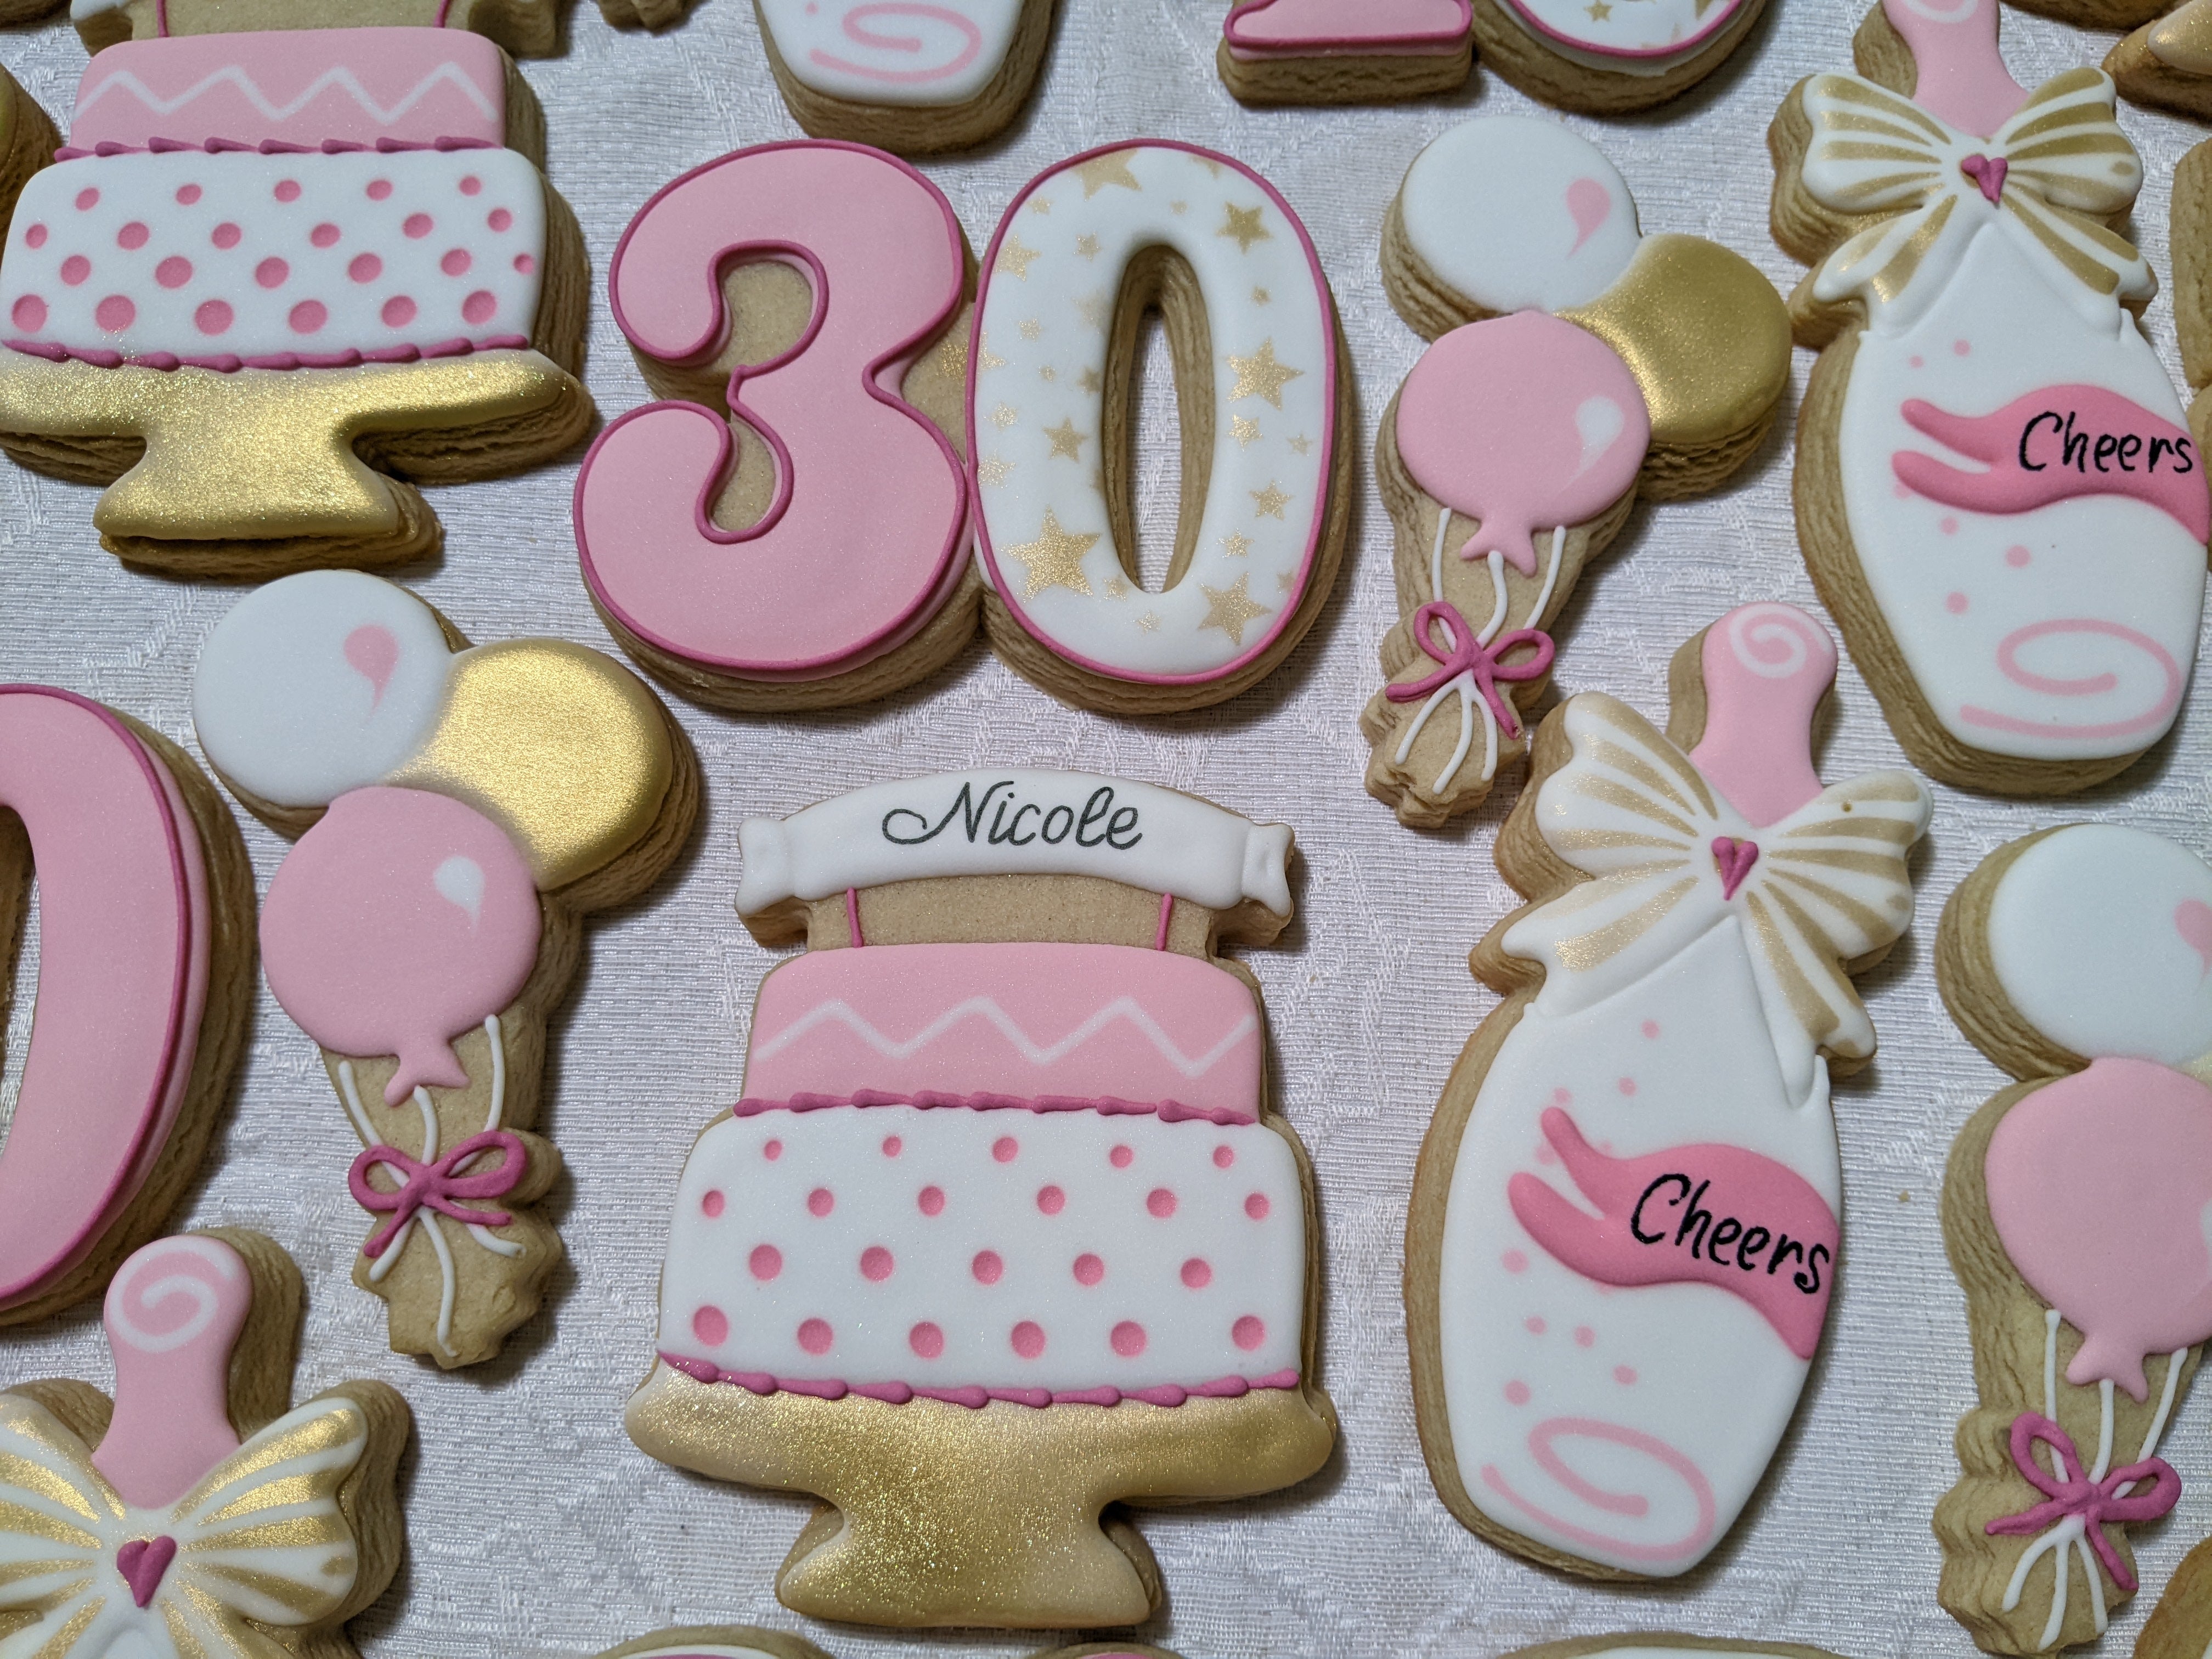 30th Birthday Party 24 Personalized Decorated Cookies